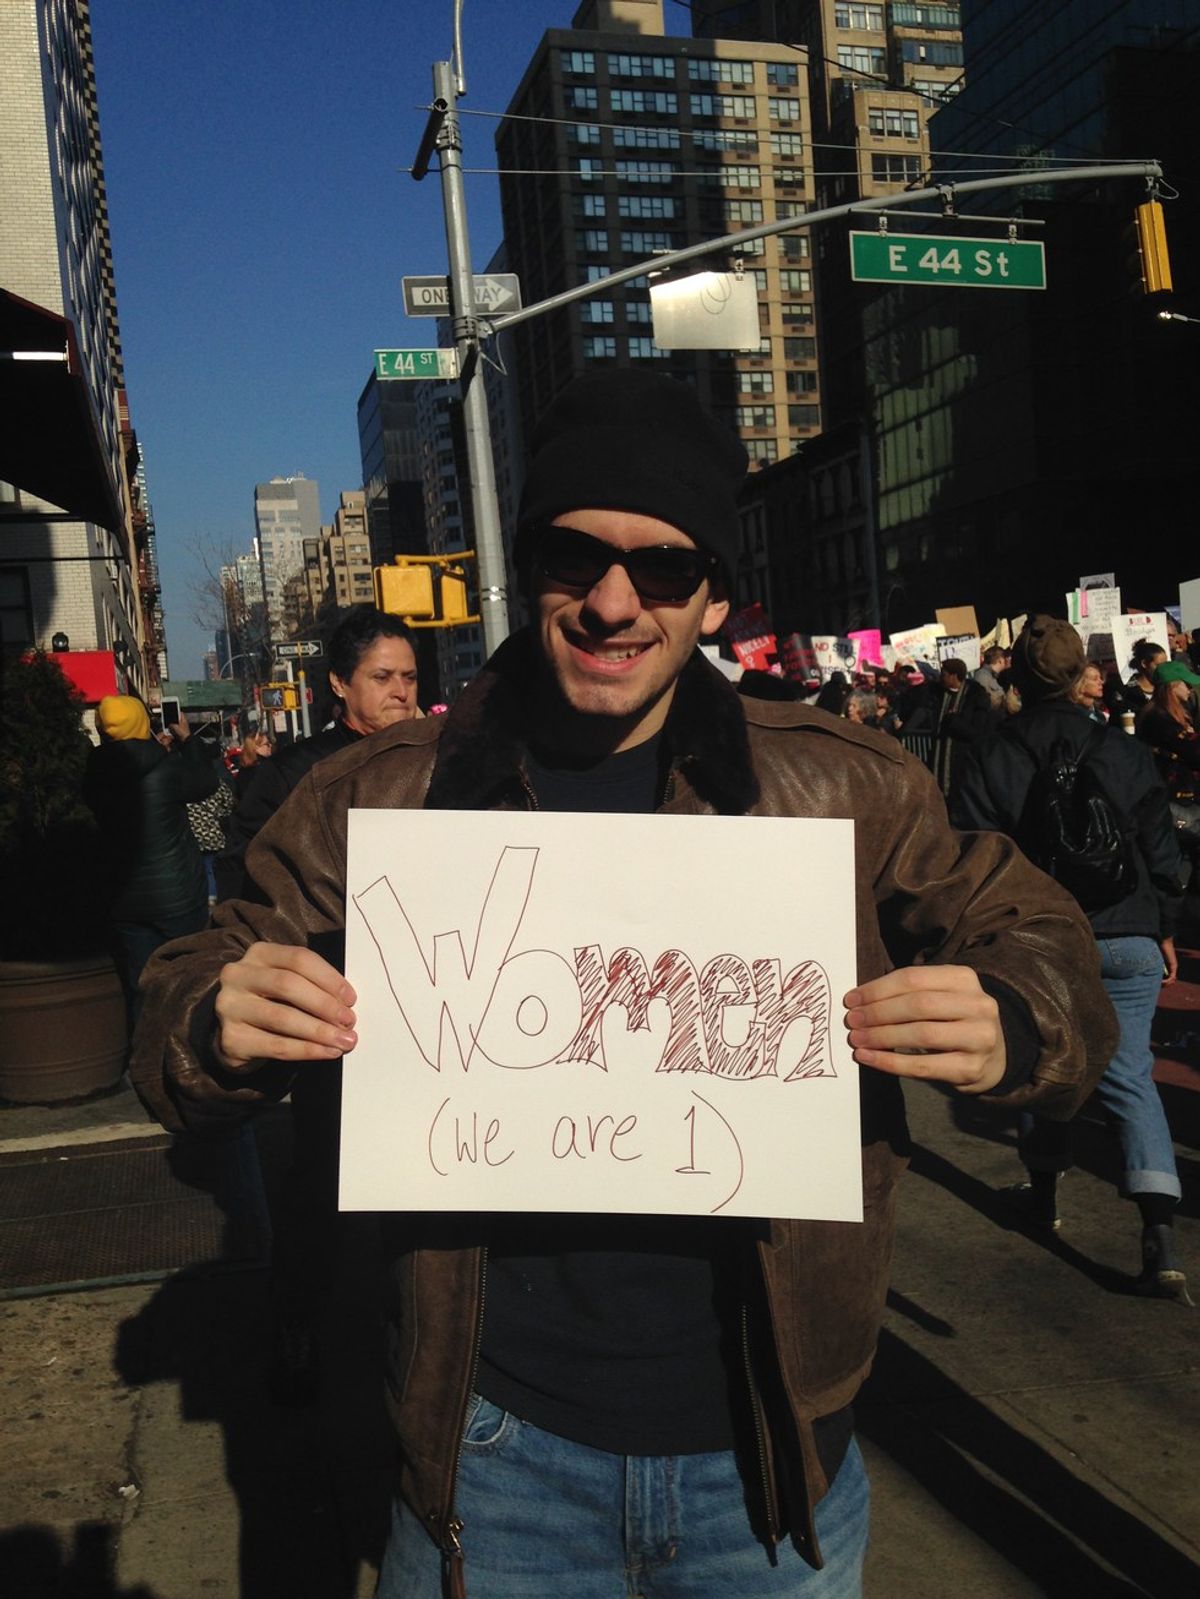 My Experience at the Women's March on NYC